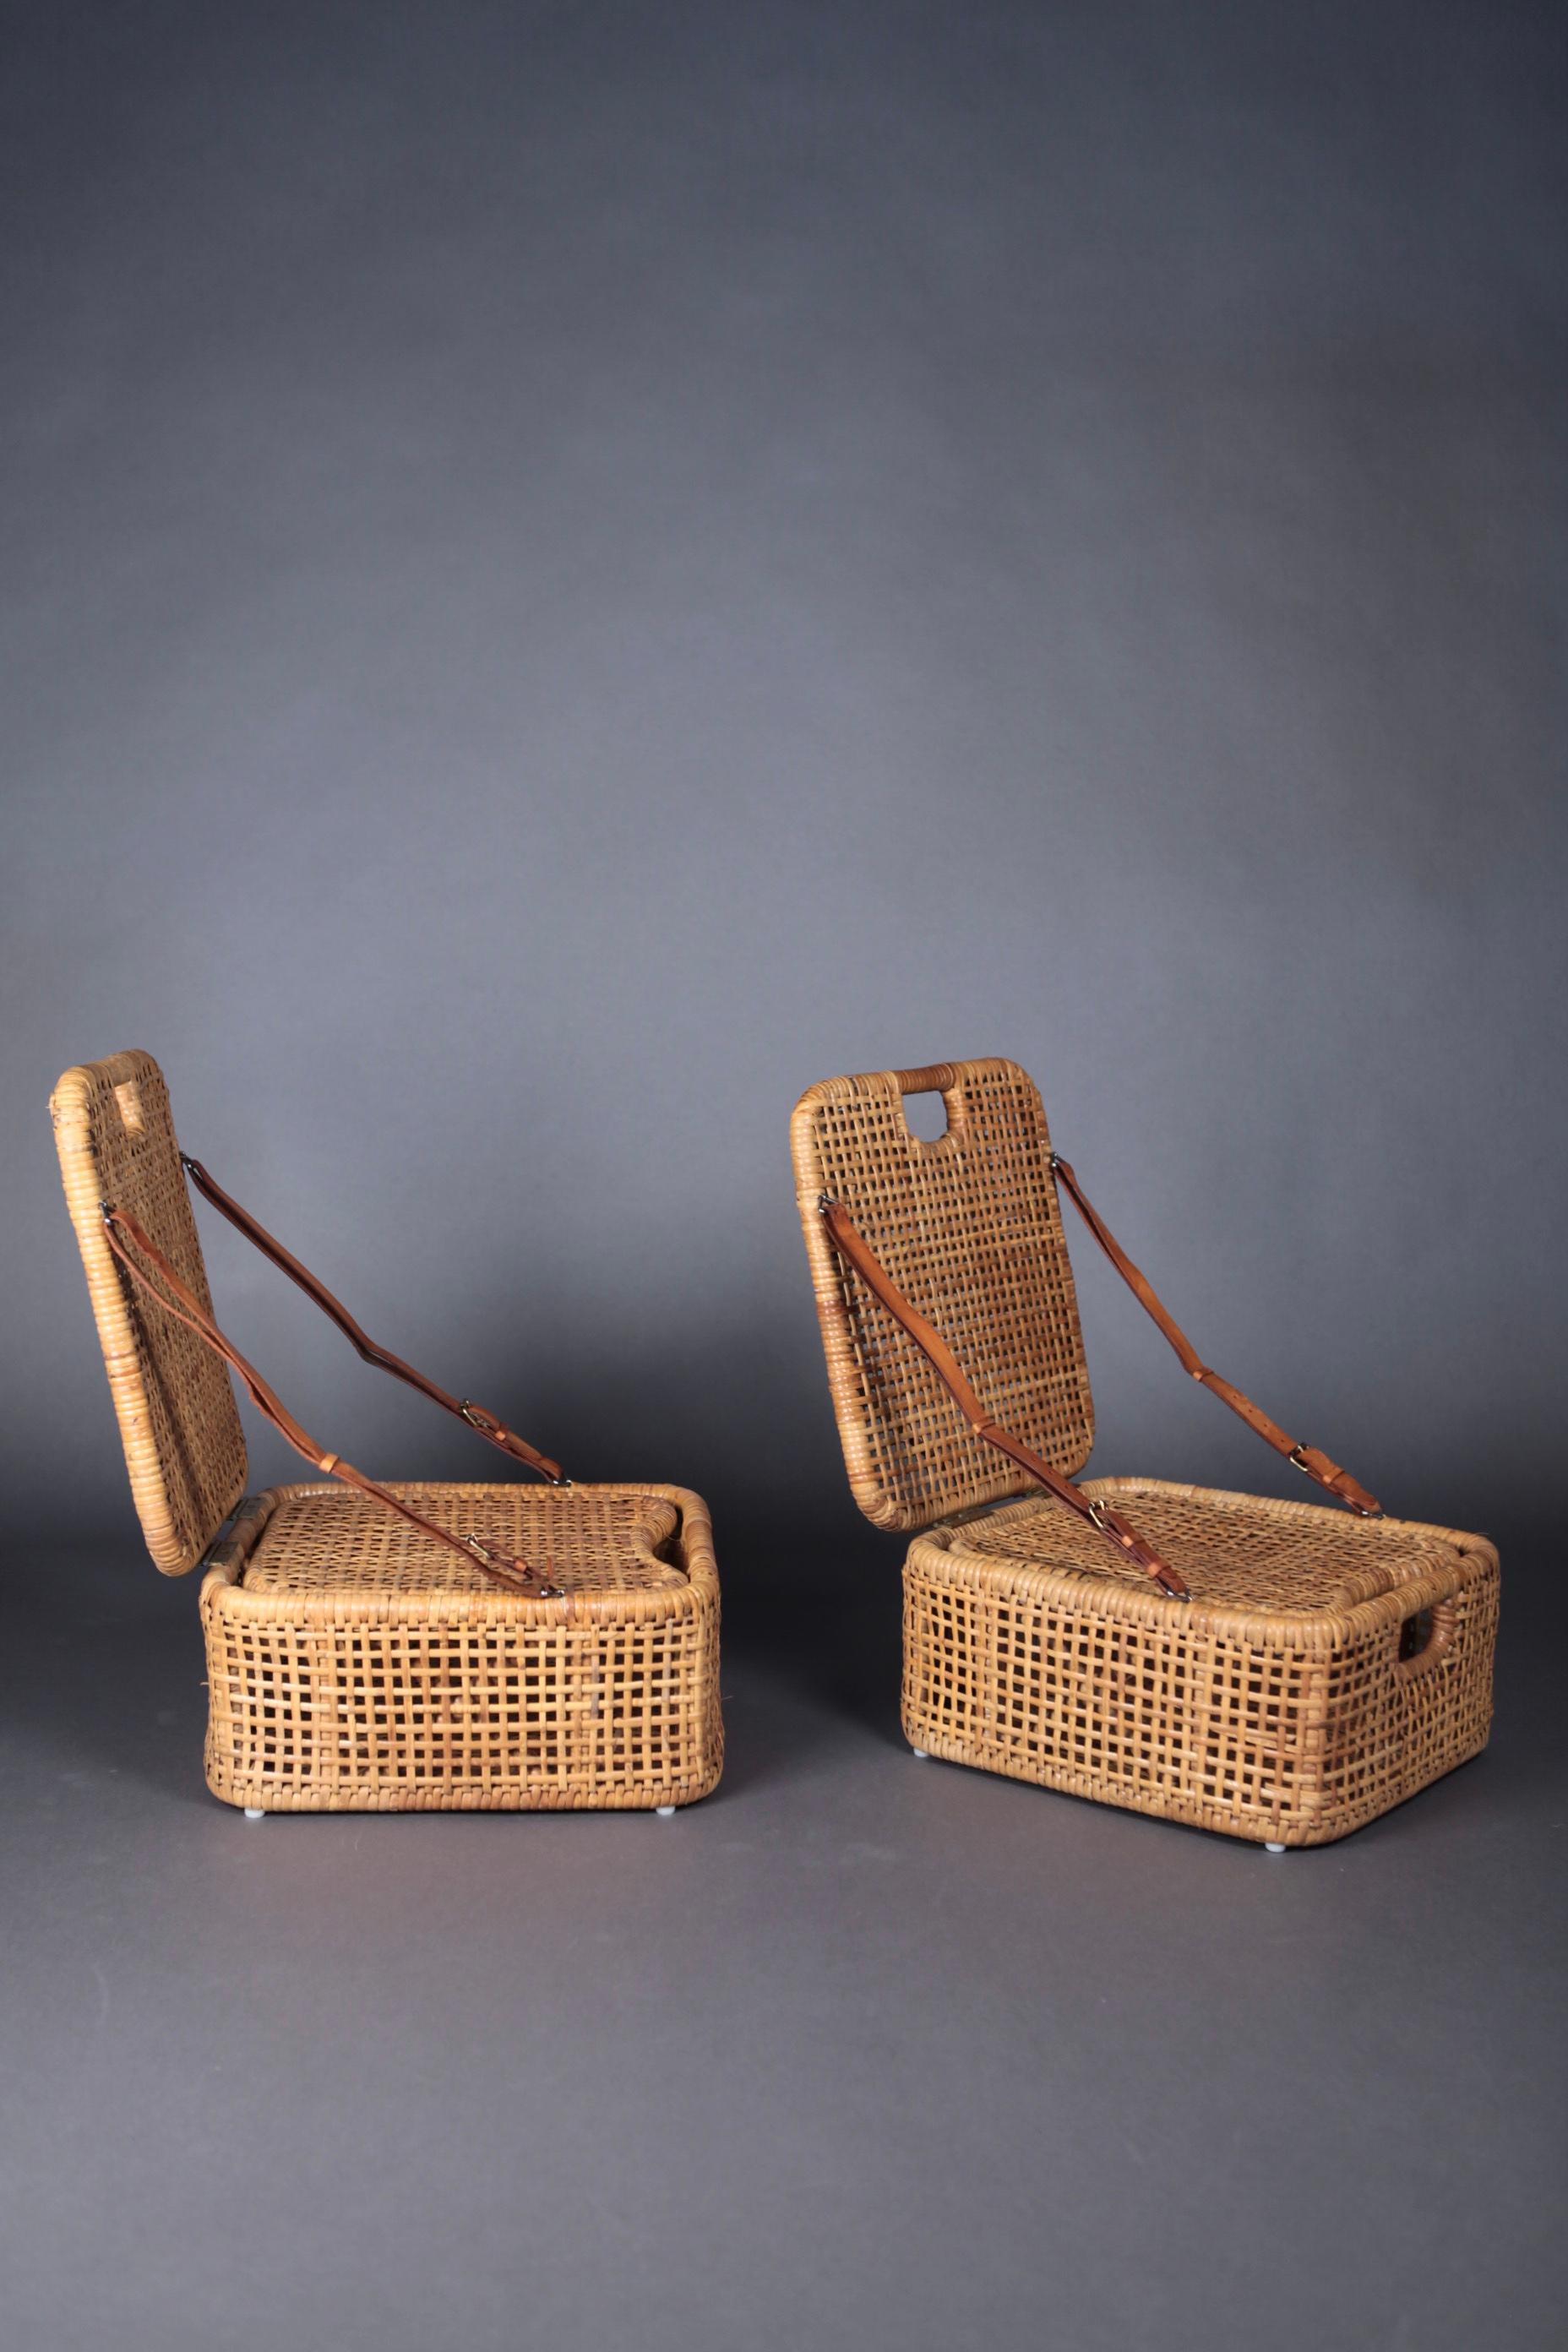 A pair of woven cane and natural leather picnic chairs and baskets.
In great vintage condition, manufactured in Sweden in the 1950s.
The box consists of an inlayed seat, with storage and transport space.
The backrest is held by 2 original leather